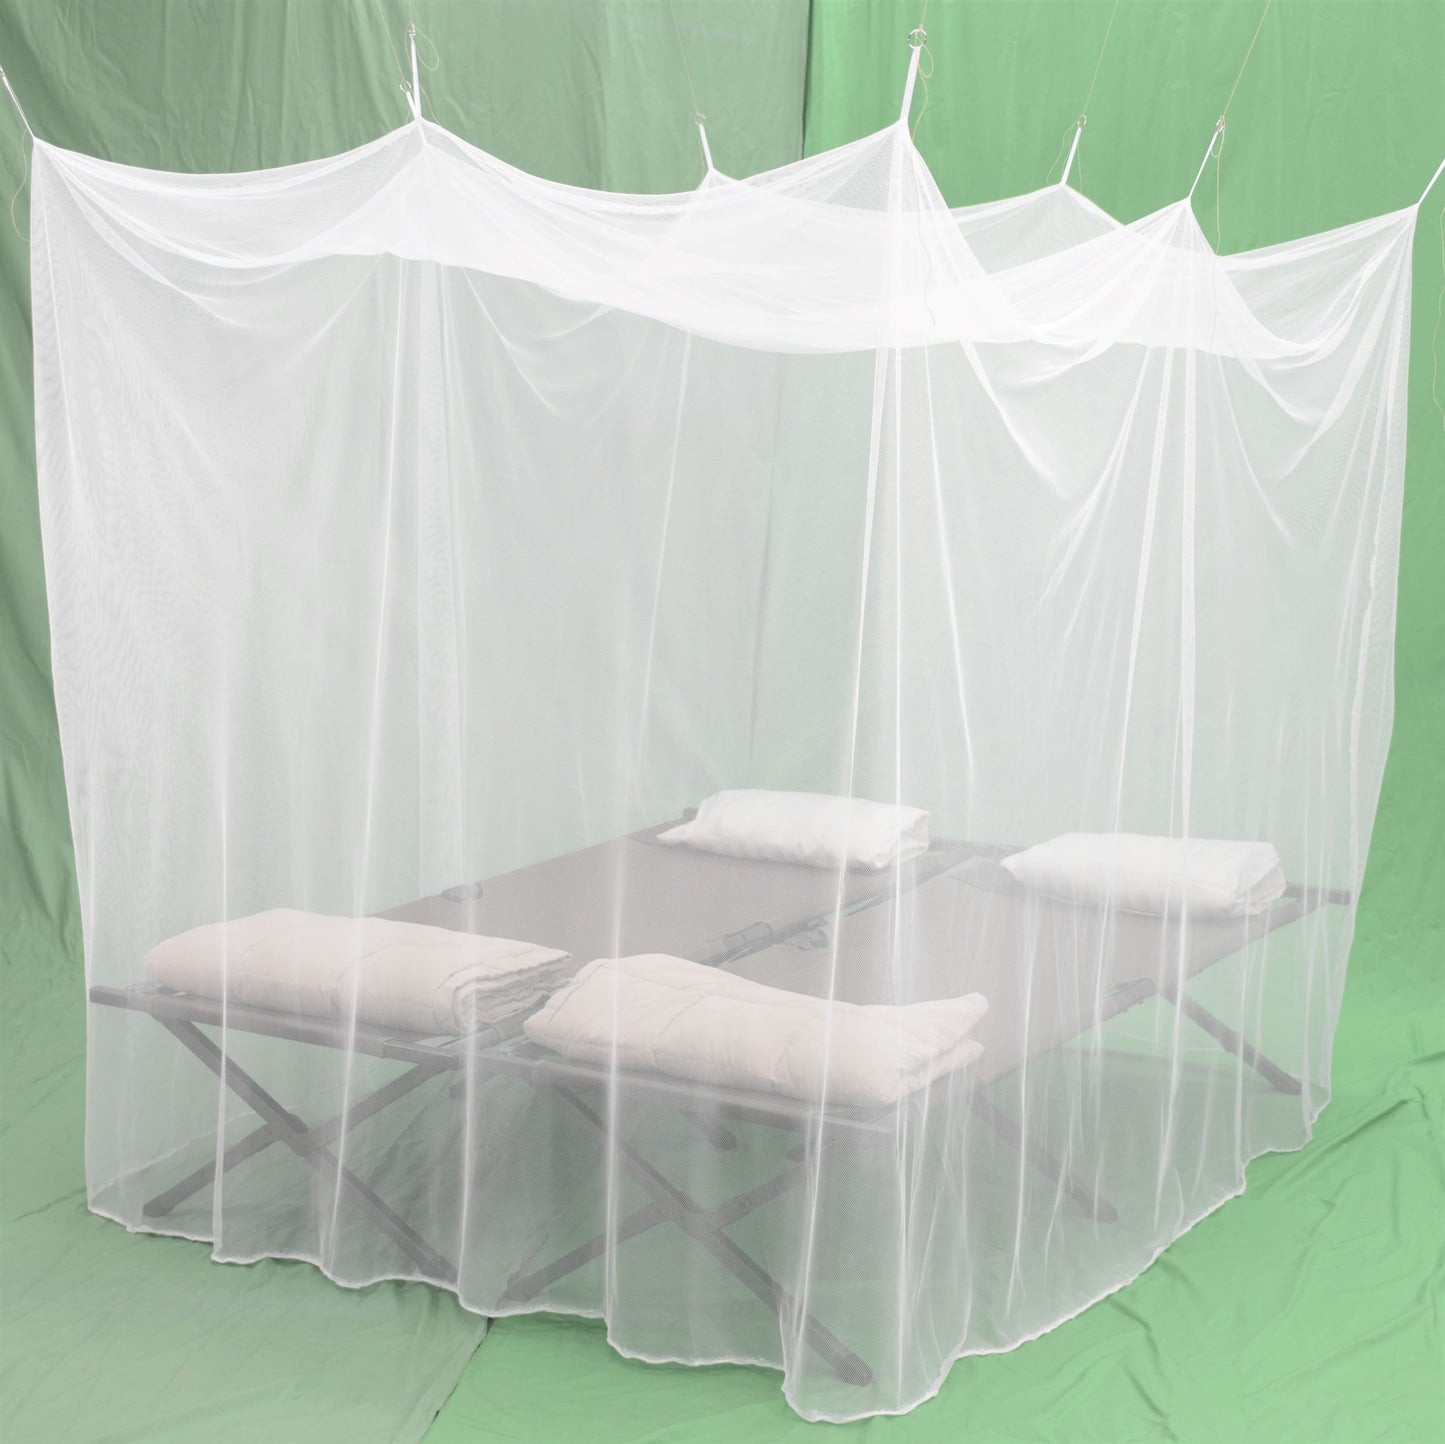 Cotmaster Rectangular White 196 Mesh Double Mosquito Net w/ Carry bag